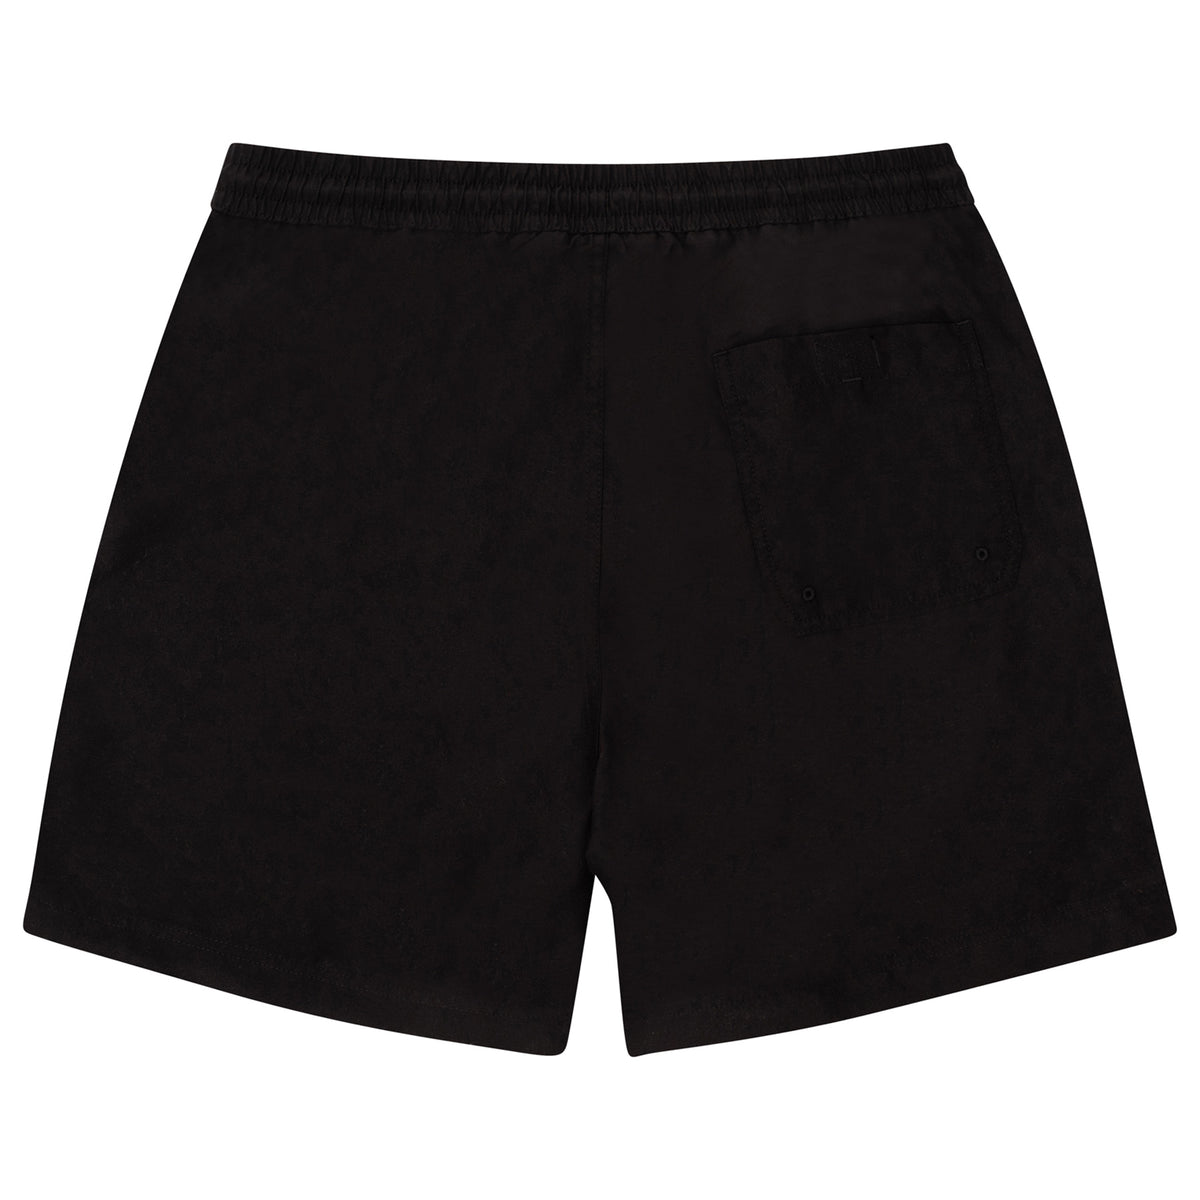 Load image into Gallery viewer, CARHARTT WIP Black-Gold Chase Swim Shorts
